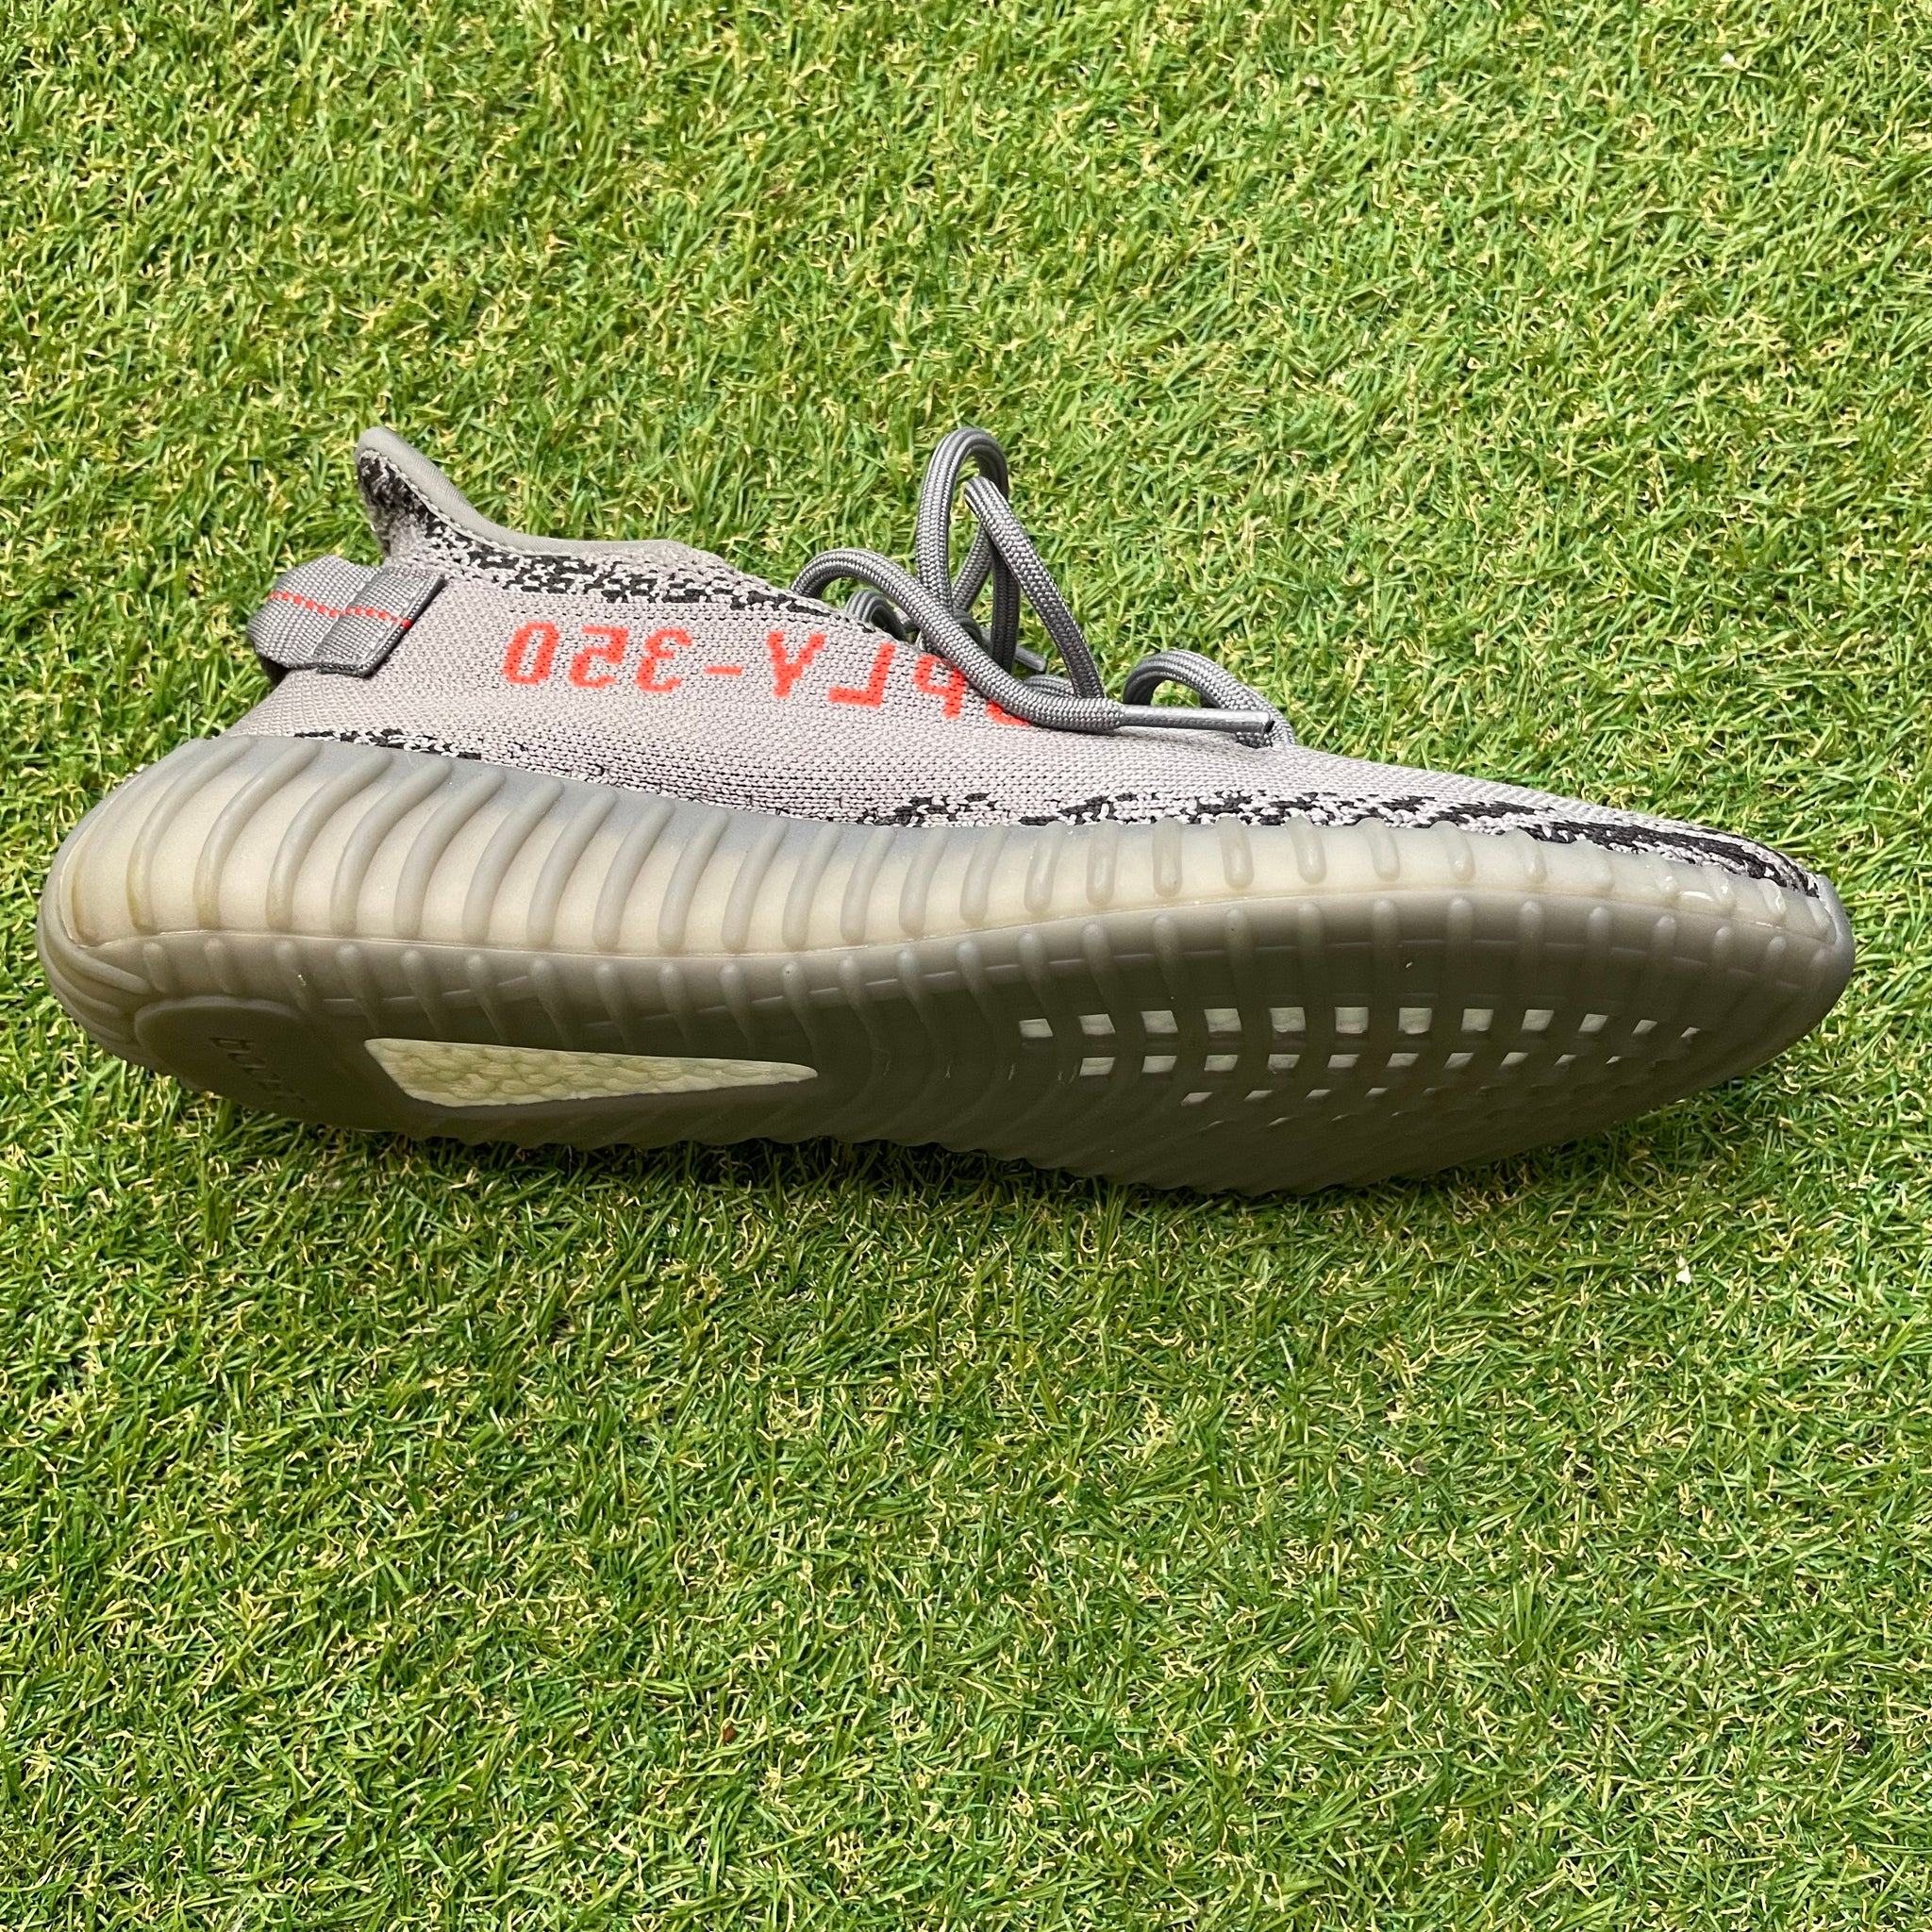 PREOWNED YEEZY BOOST 350 V2 'BELUGA 2.0'